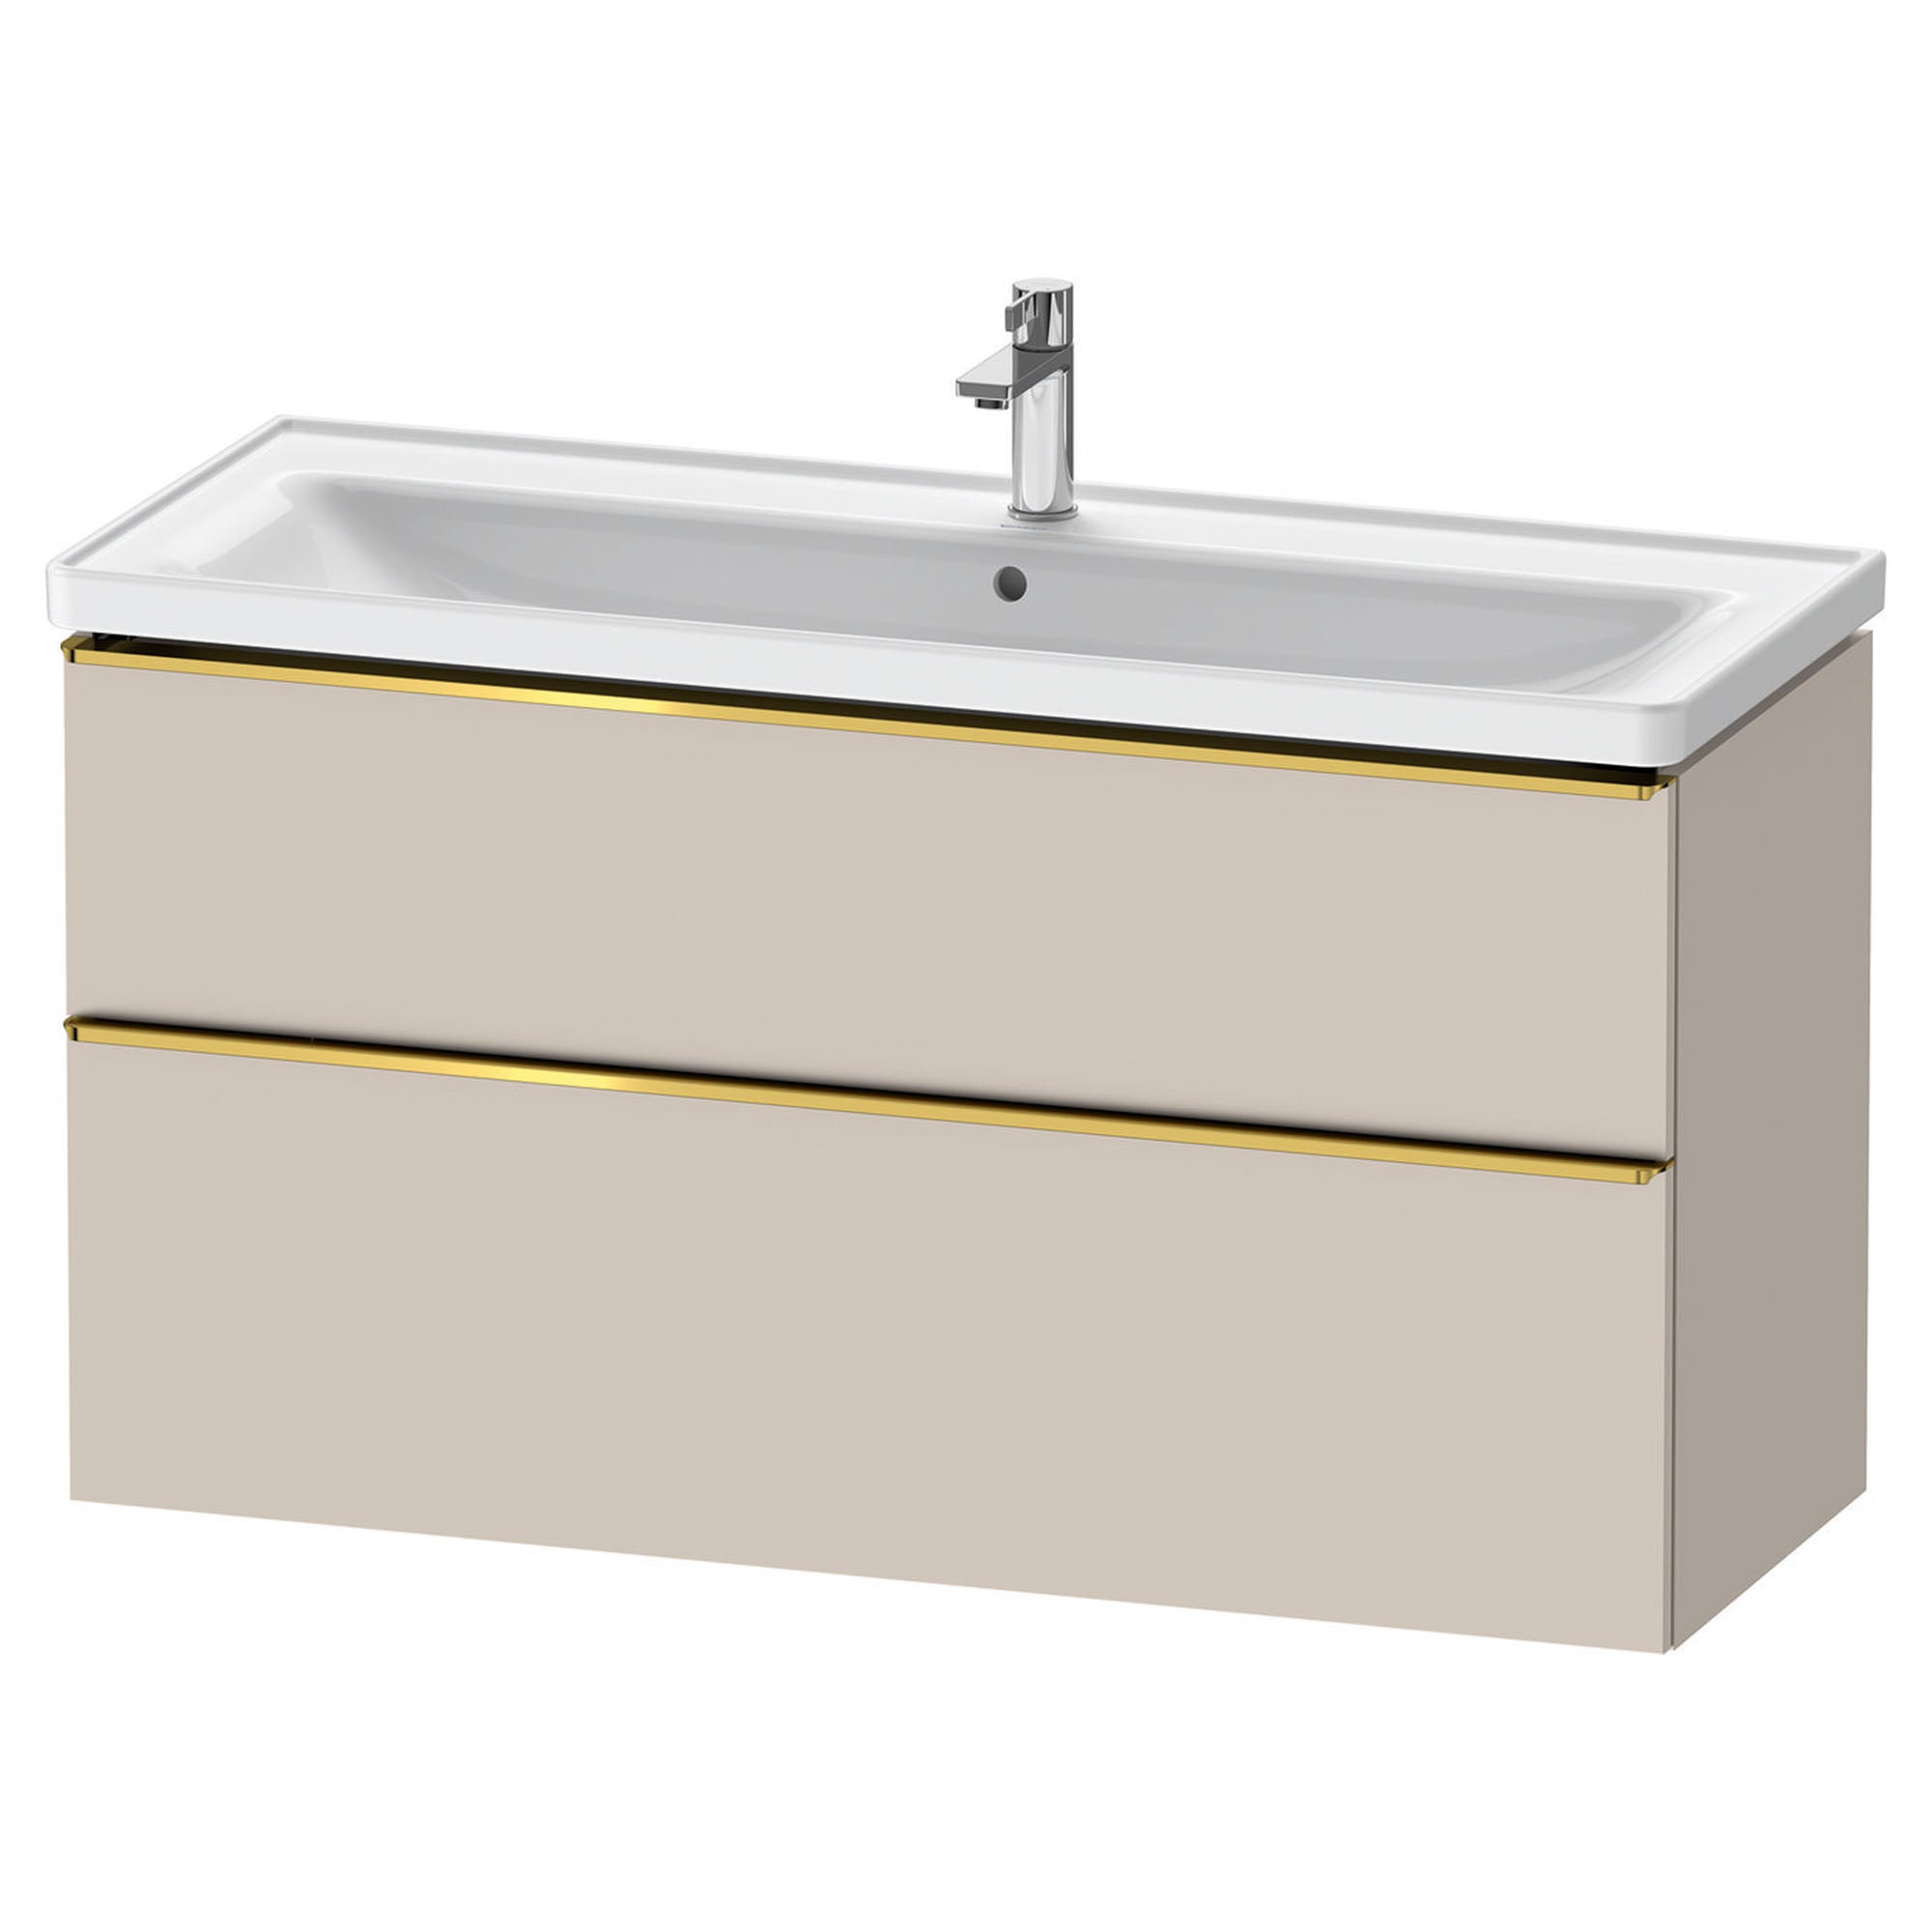 duravit d-neo 1200mm wall mounted vanity unit with d-neo basin taupe gold handles